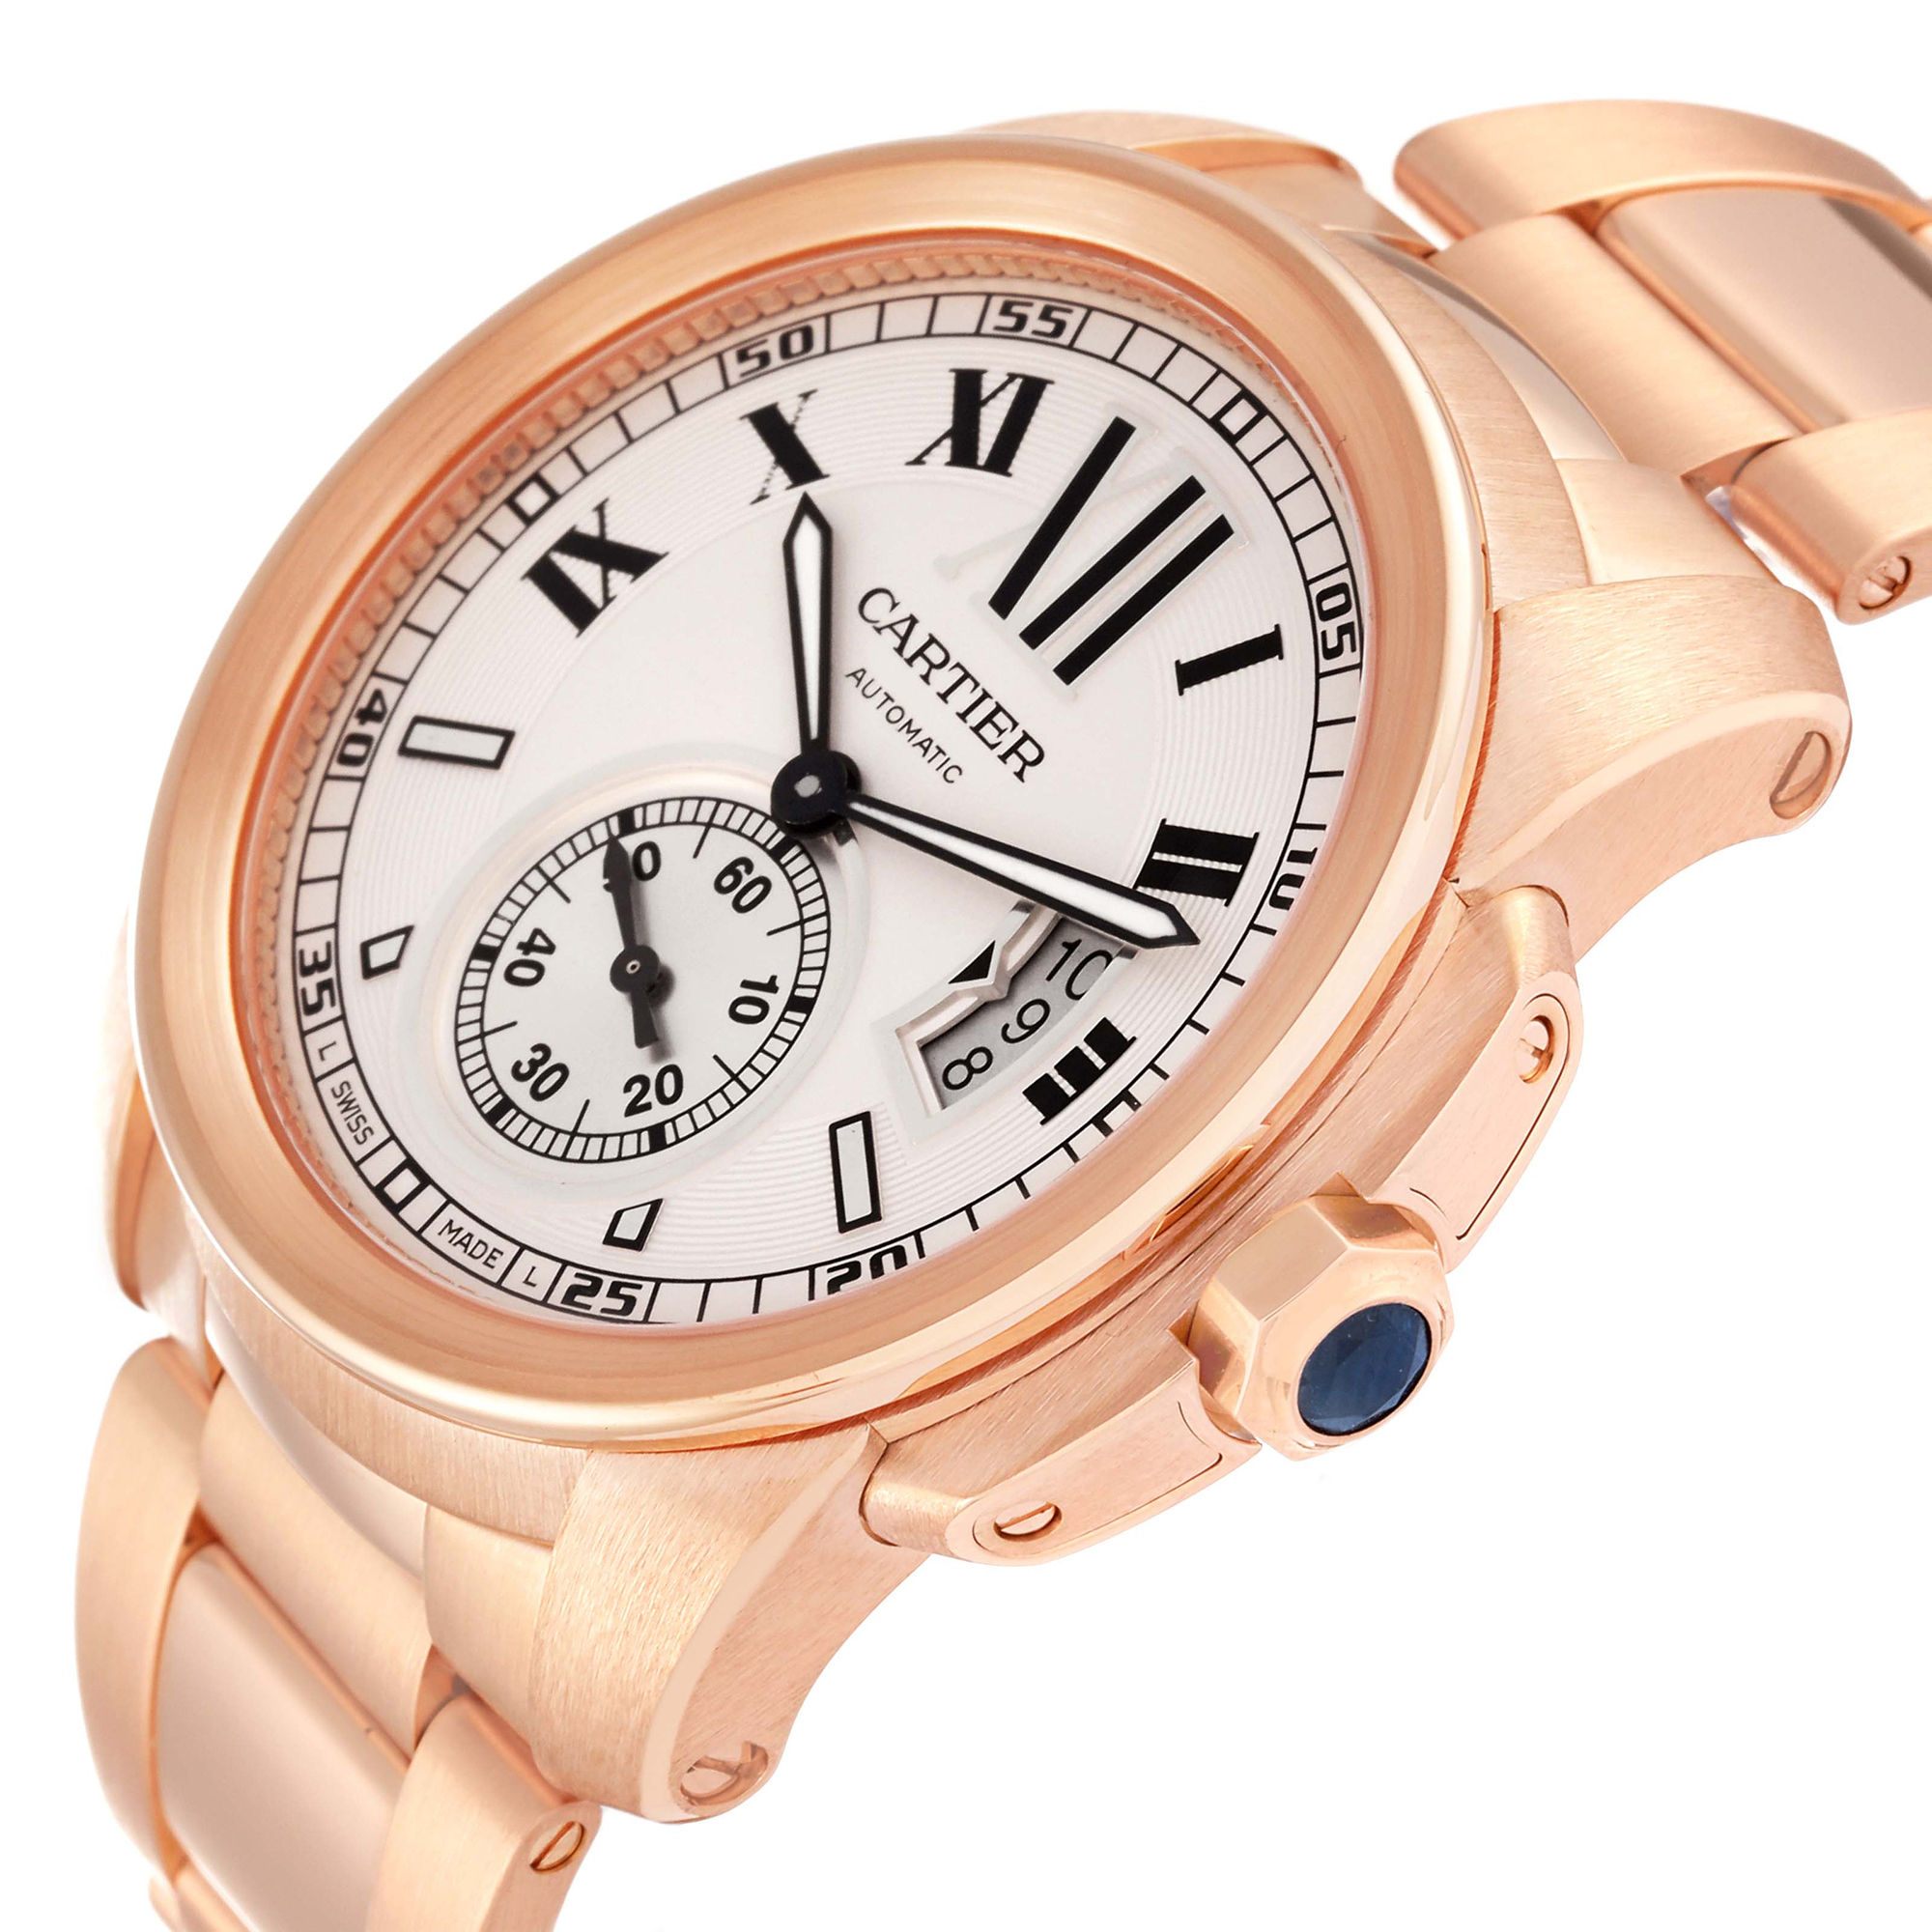 Cartier Calibre Rose Gold Silver Dial Automatic Men's Watch W7100018 42 Mm